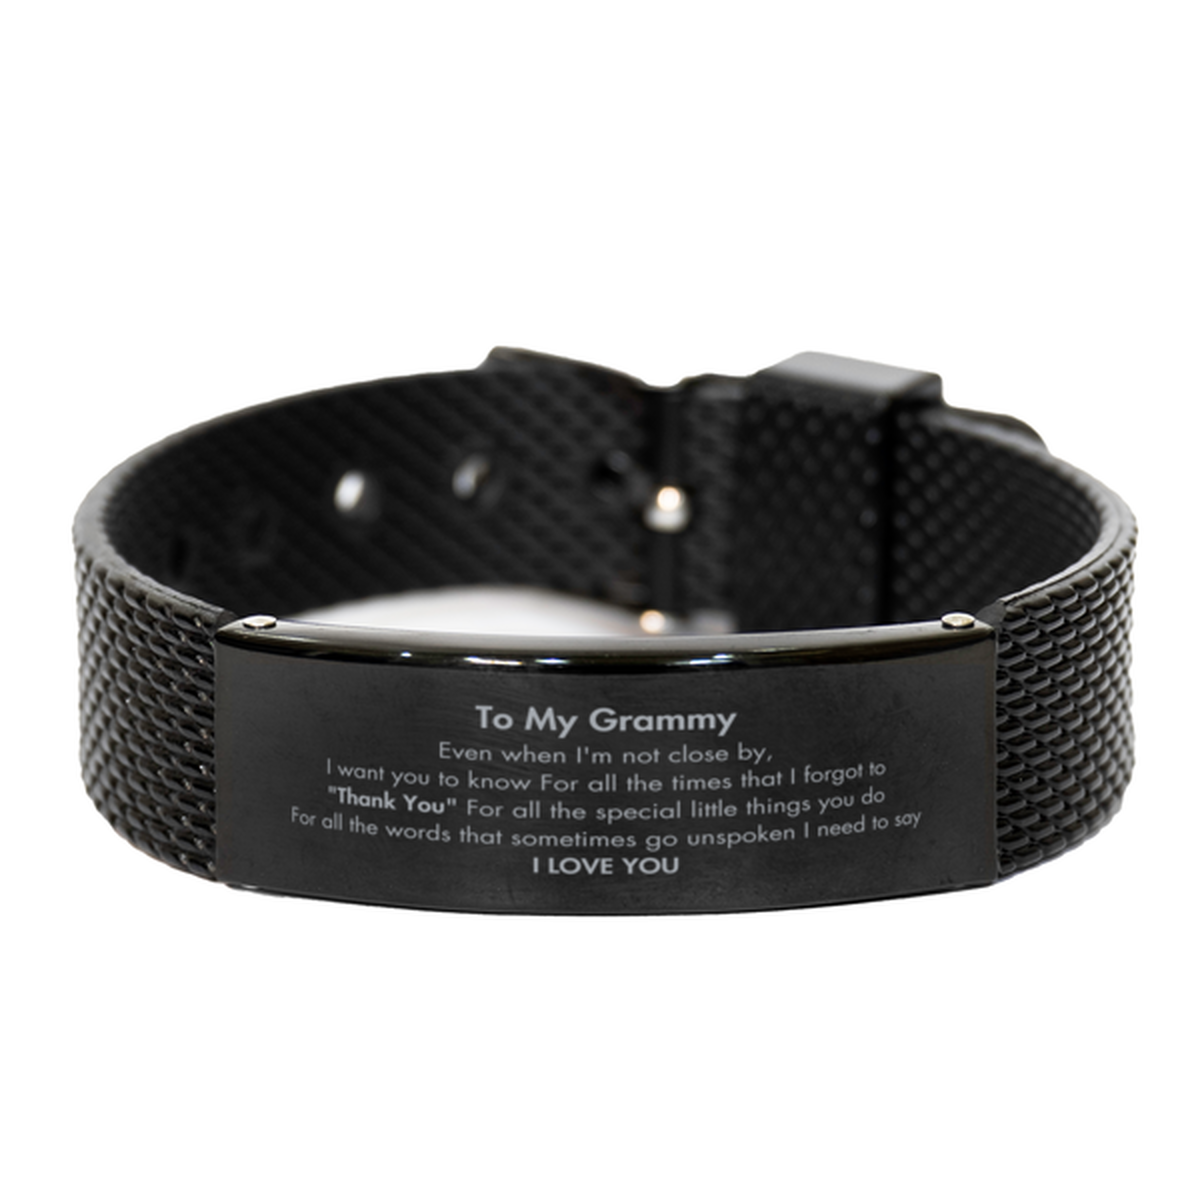 Thank You Gifts for Grammy, Keepsake Black Shark Mesh Bracelet Gifts for Grammy Birthday Mother's day Father's Day Grammy For all the words That sometimes go unspoken I need to say I LOVE YOU